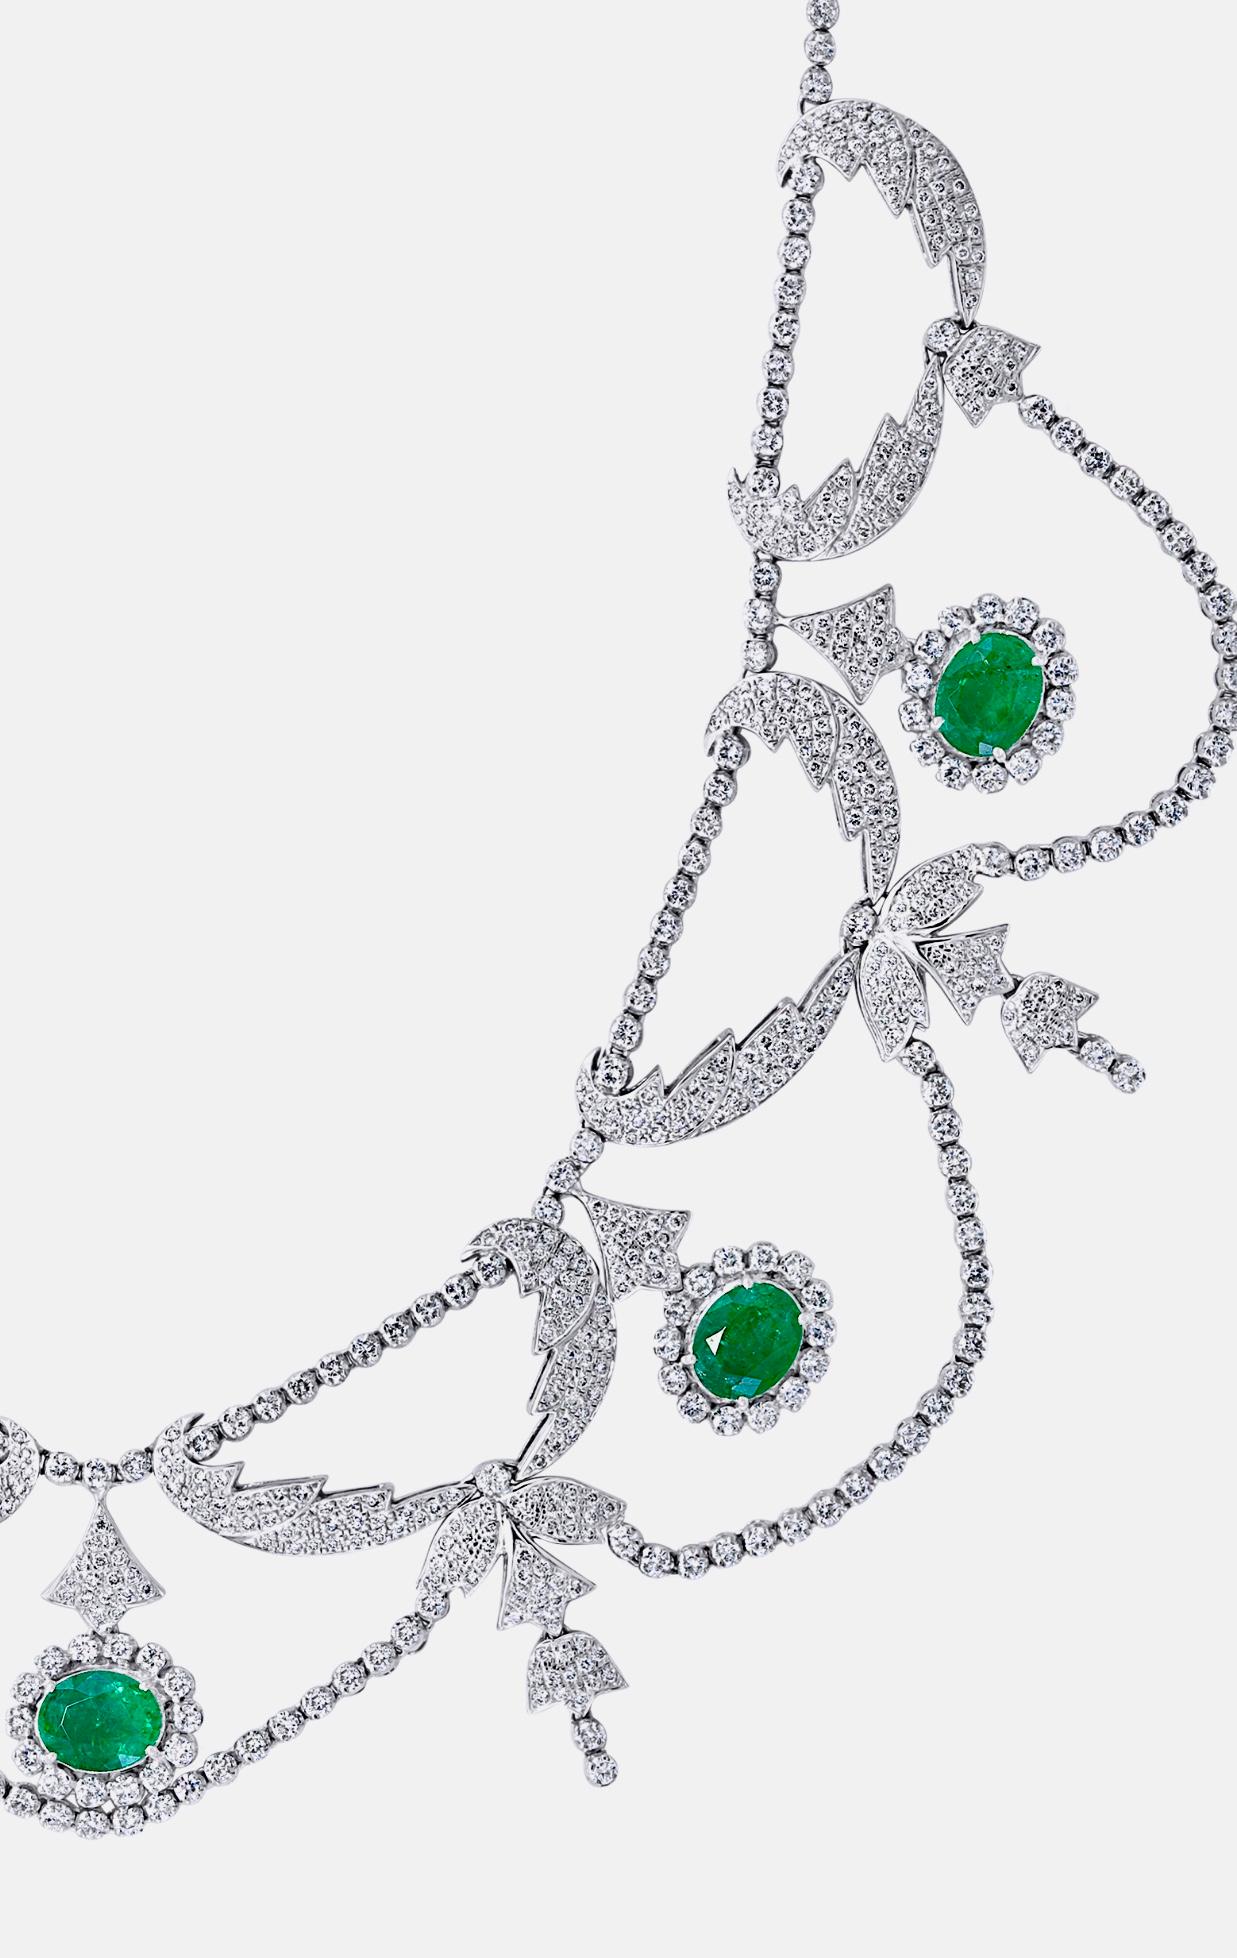 Oval Natural Zambian Emerald & Diamond Fringe Necklace and Earring Bridal Suite For Sale 1